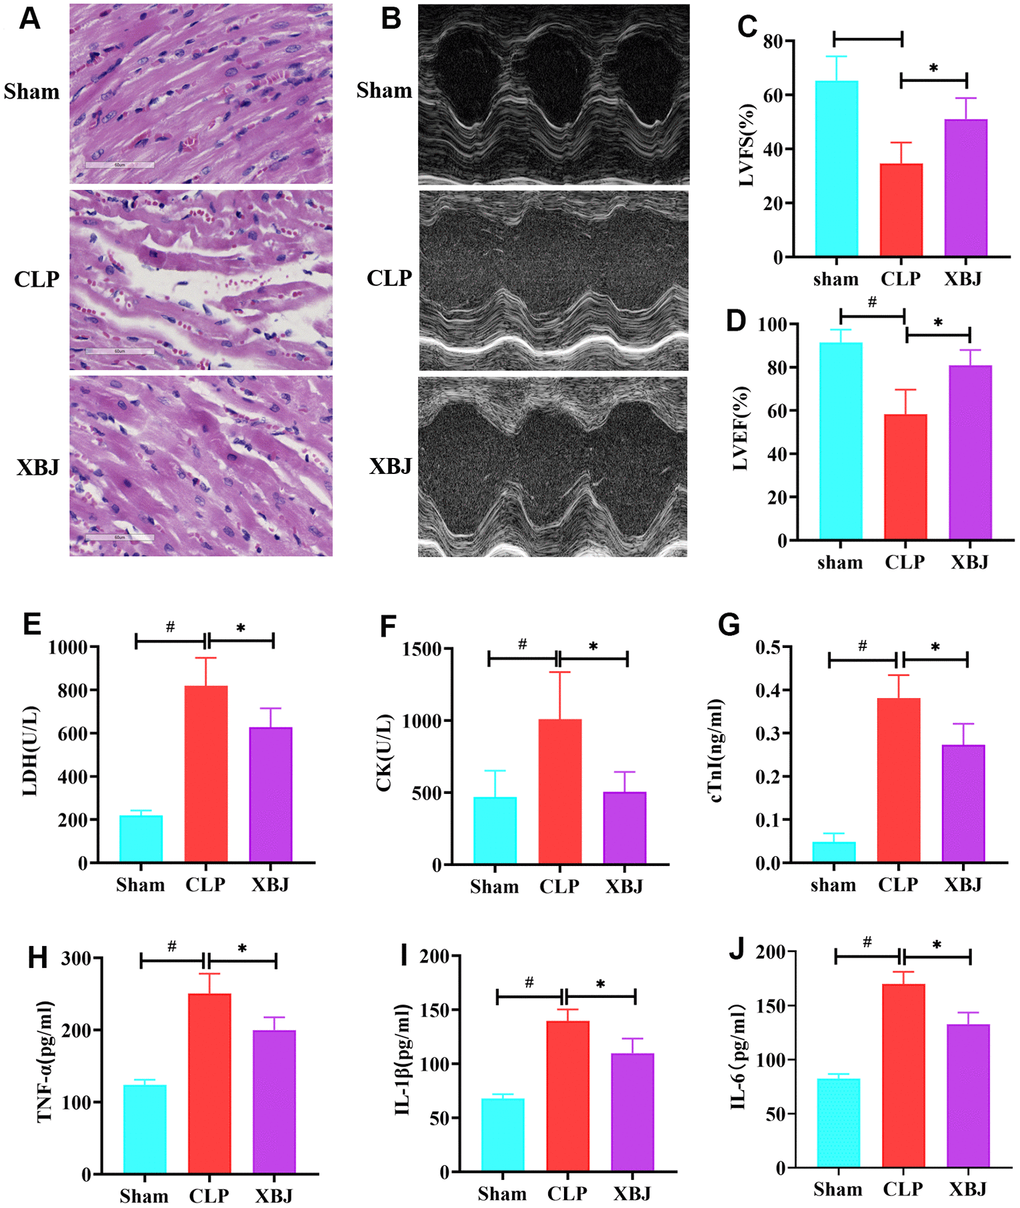 Effects of XBJ on myocardial damage and inflammation in rat after CLP. (A) Pathological changes of myocardial tissues under HE staining (200×). (B) Representative echocardiographic images. (C, D) Quantification of LVFS and LVEF via echocardiography. (E–G) XBJ improved myocardial dysfunction in rat after CLP: Serum levels of LDH (E), CK (F) and cTnI (G) detected by automated biochemical analyzer. (H–J) XBJ alleviated the myocardial inflammation in rat after CLP: Serum levels of TNF-α (H), IL-1β (I) and IL-6 (J) detected by ELISA. Data are expressed as mean ± SD (n = 6/group), # indicates pp